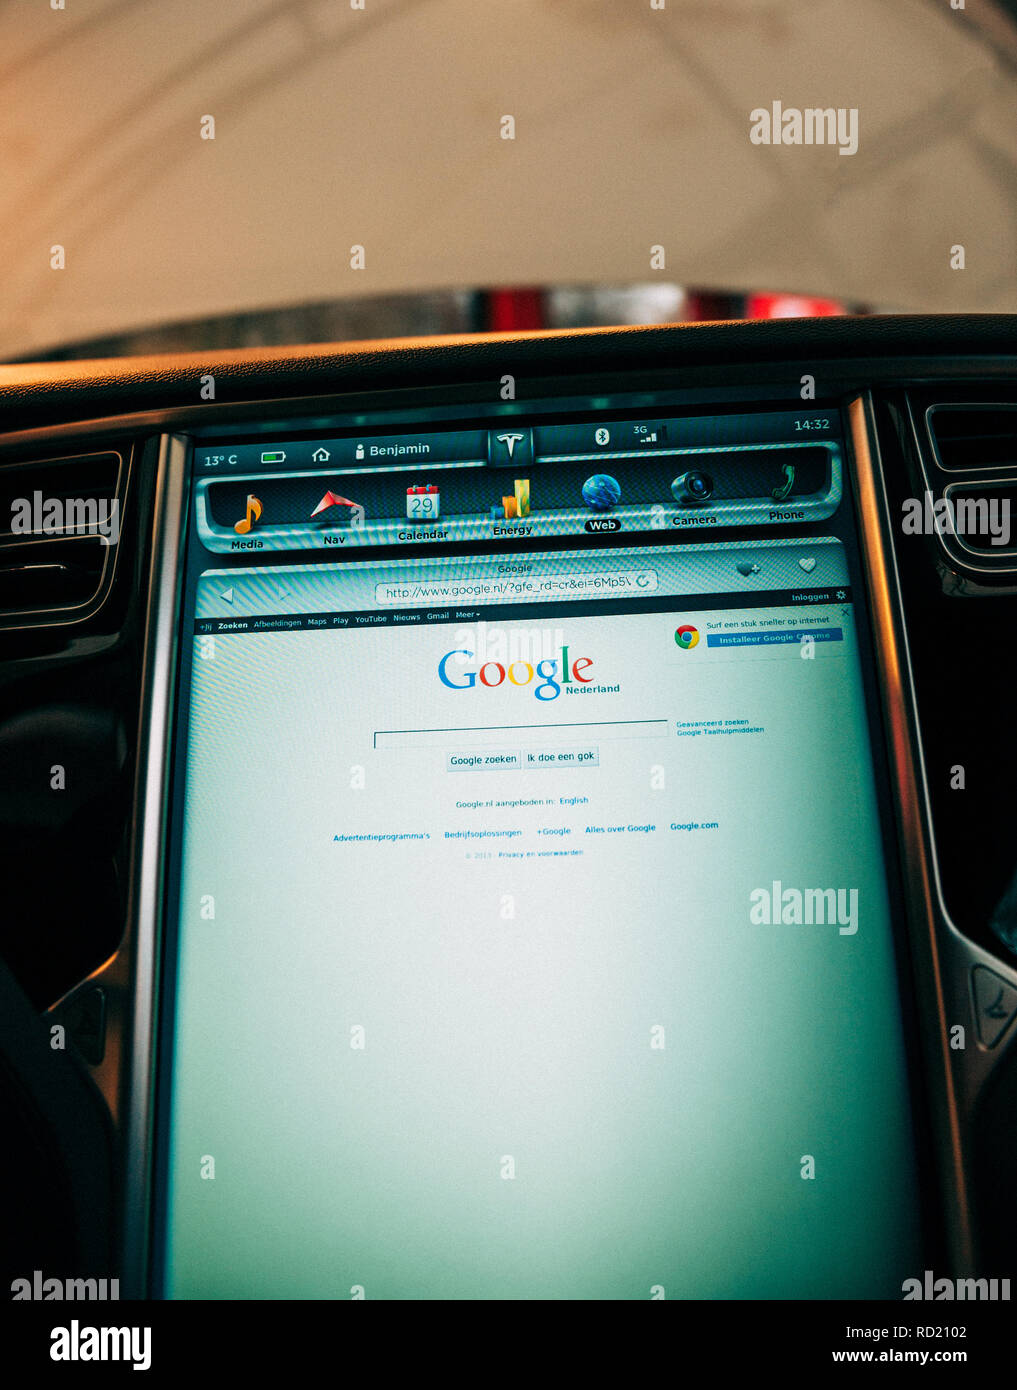 PARIS, FRANCE - NOV 29, 2014: New Tesla Model S dashboard computer display screen with Google browser activated homepage and multiple icons of the car  Stock Photo